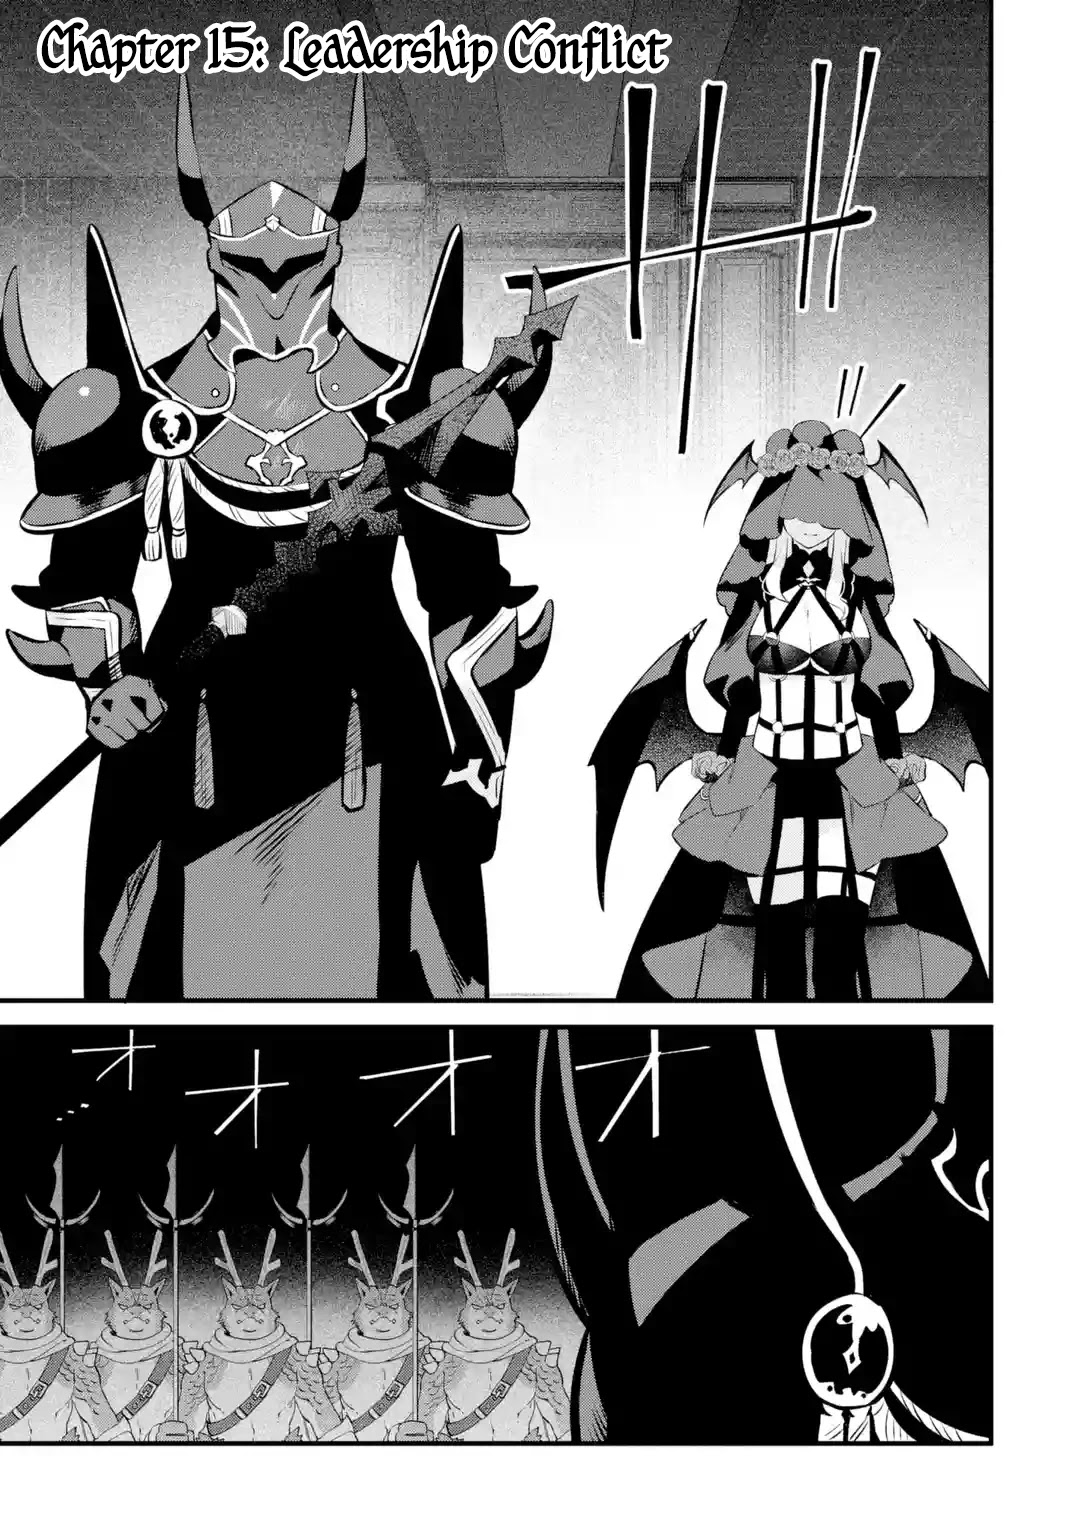 Welcome To The Impregnable Demon King Castle ~The Black Mage Who Got Kicked Out Of The Hero Party Due To His Unnecessary Debuffs Gets Welcomed By The Top Brass Of The Demon King's Army~ Chapter 15: Leadership Conflict - Picture 1